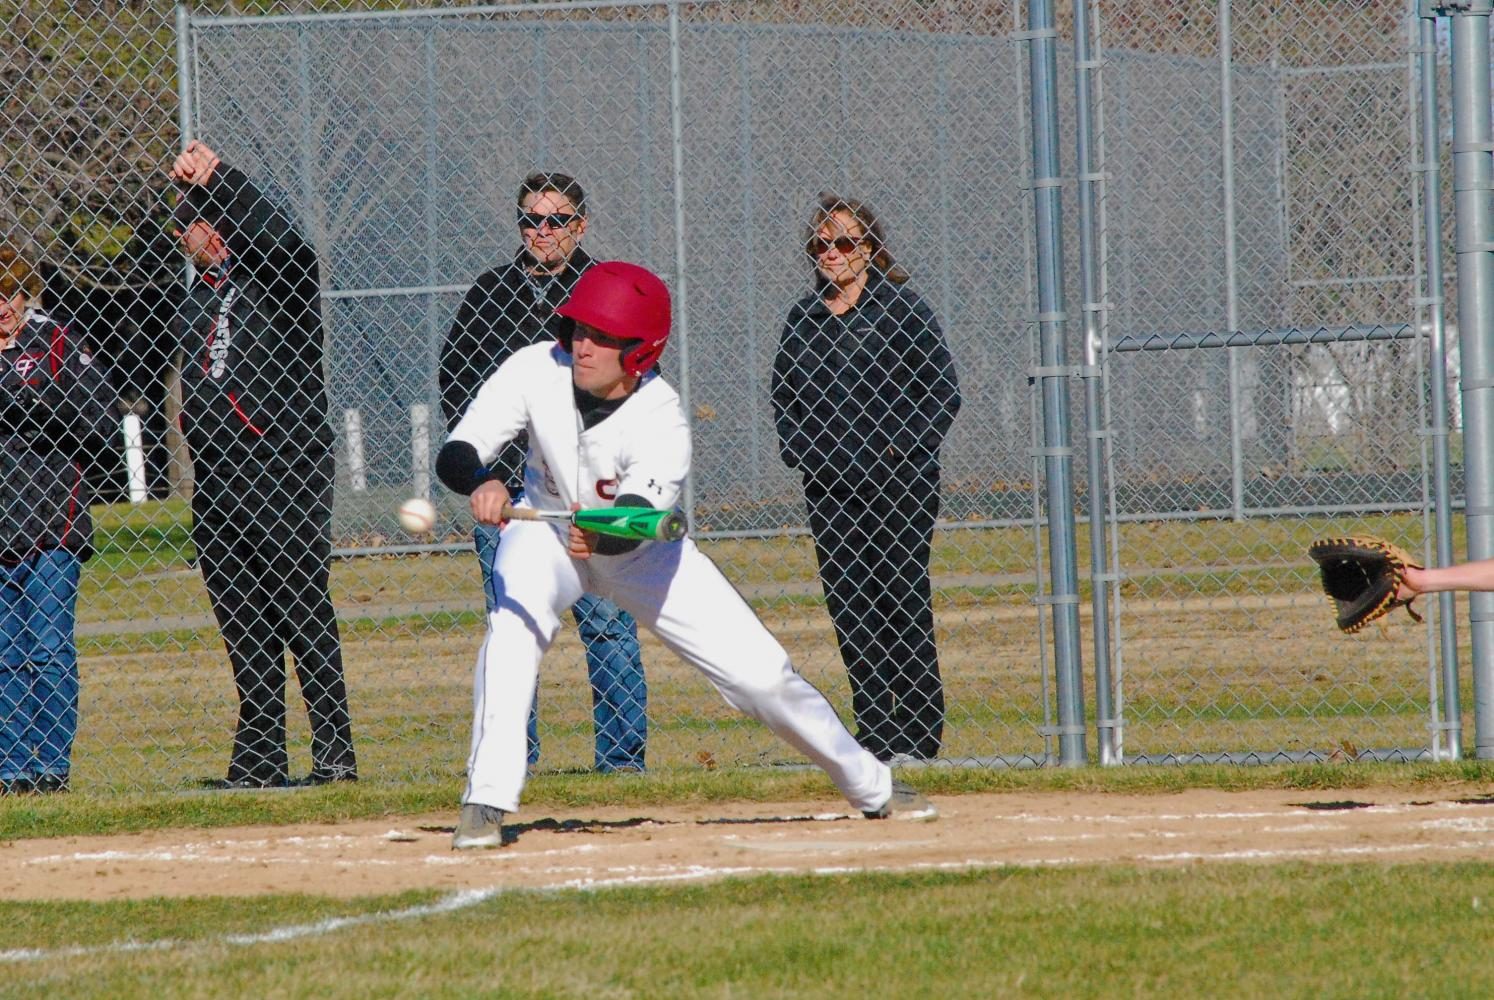 a Bomber batter puts the ball on the ground for a single